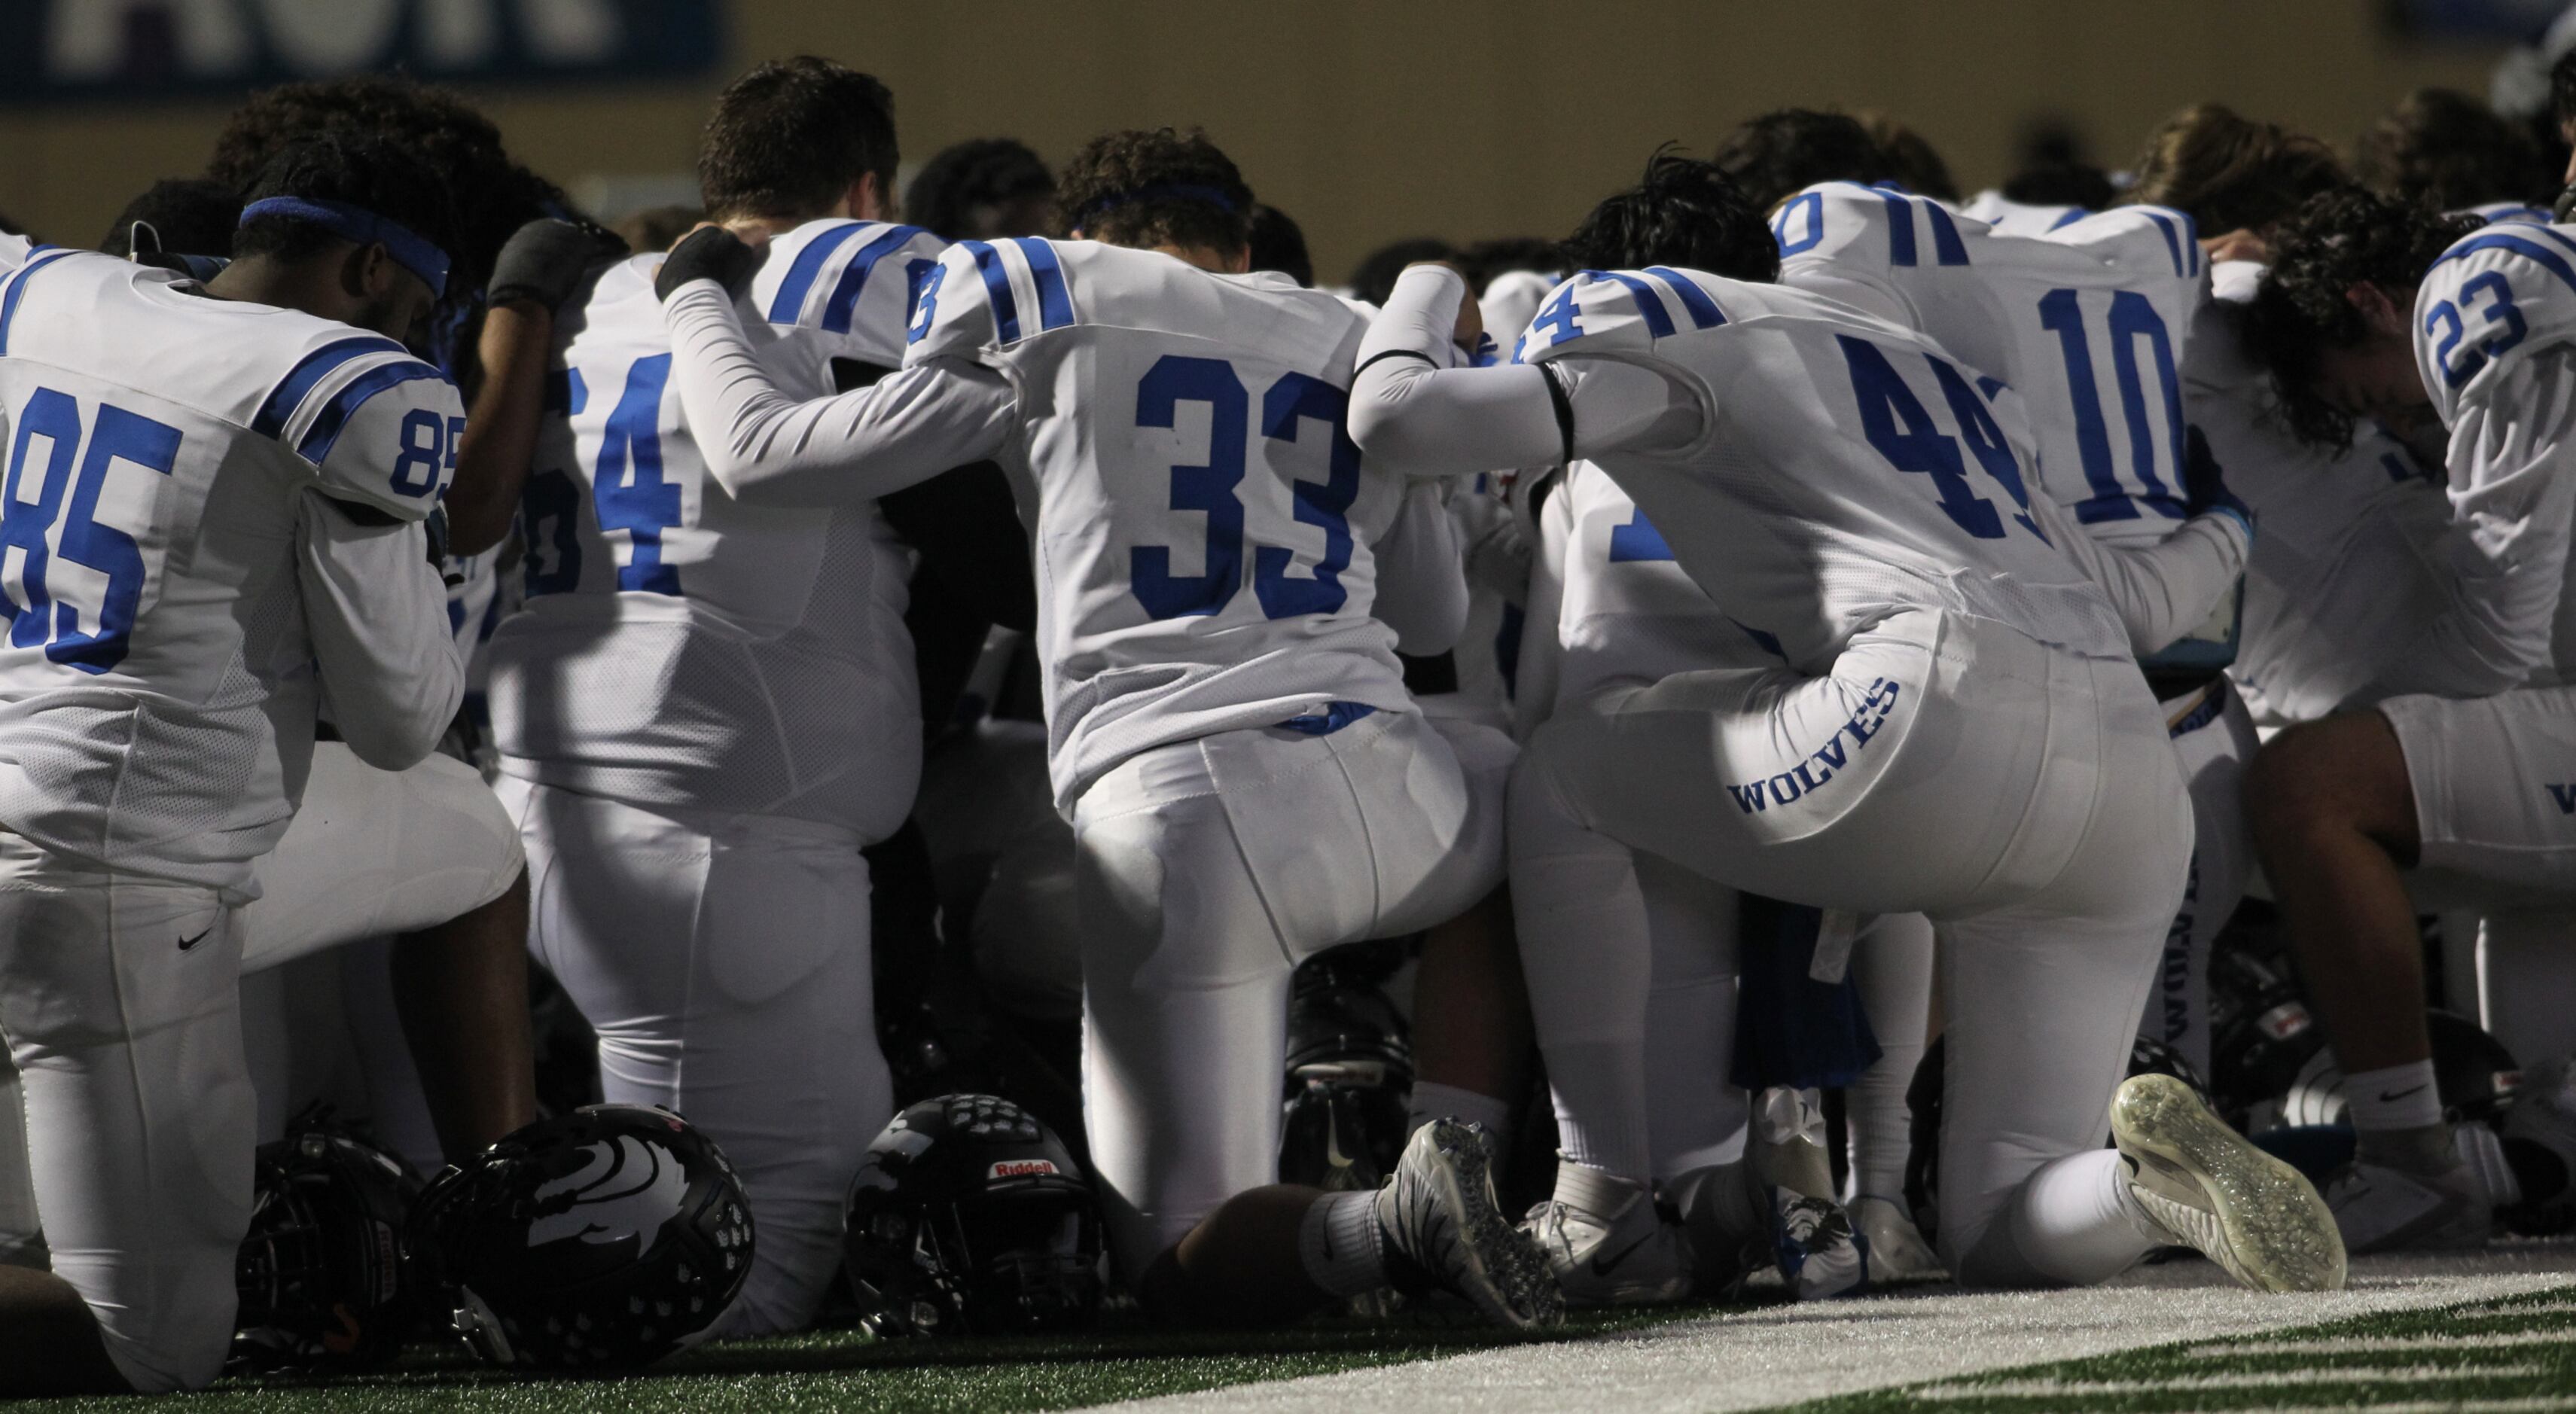 Plano West Wolves huddle near the team's bench area while medical personnel assist Wolves...